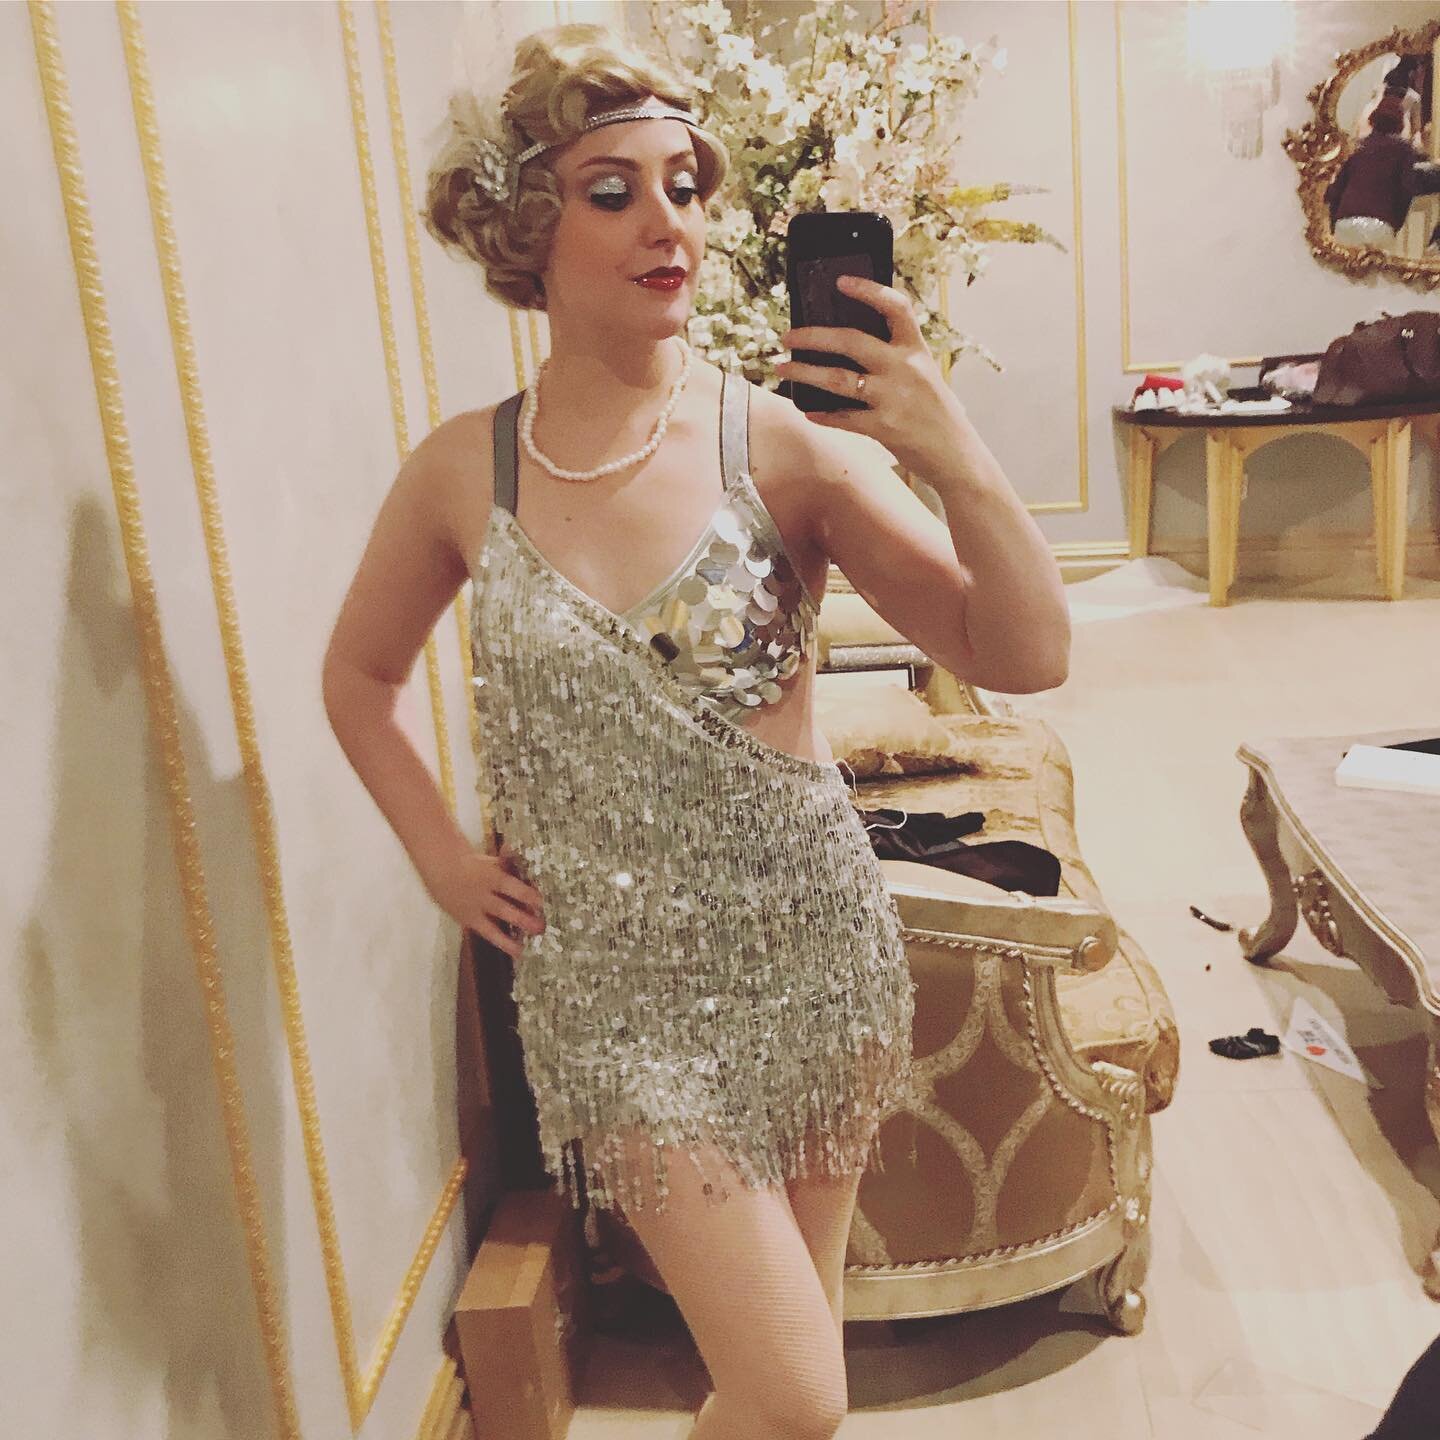 Me, happy that prohibition started 100 years ago and not yesterday. 🥂
@gatsbyentertainment